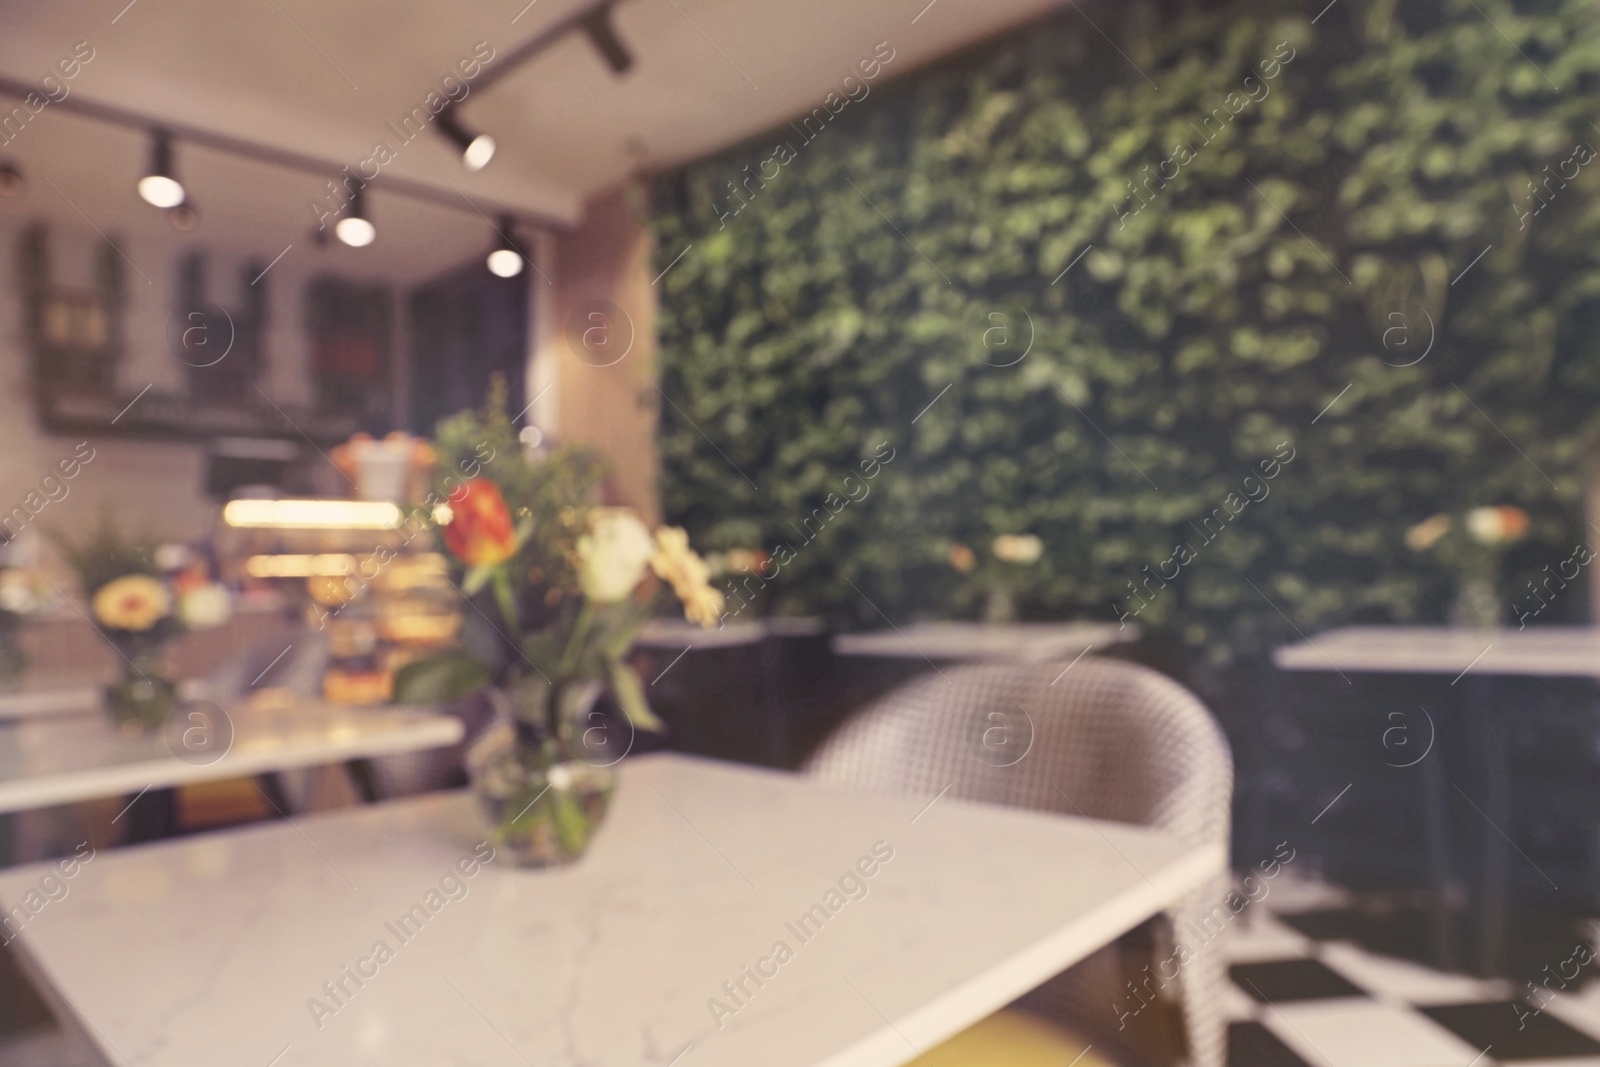 Photo of Stylish cafe interior with furniture, blurred view